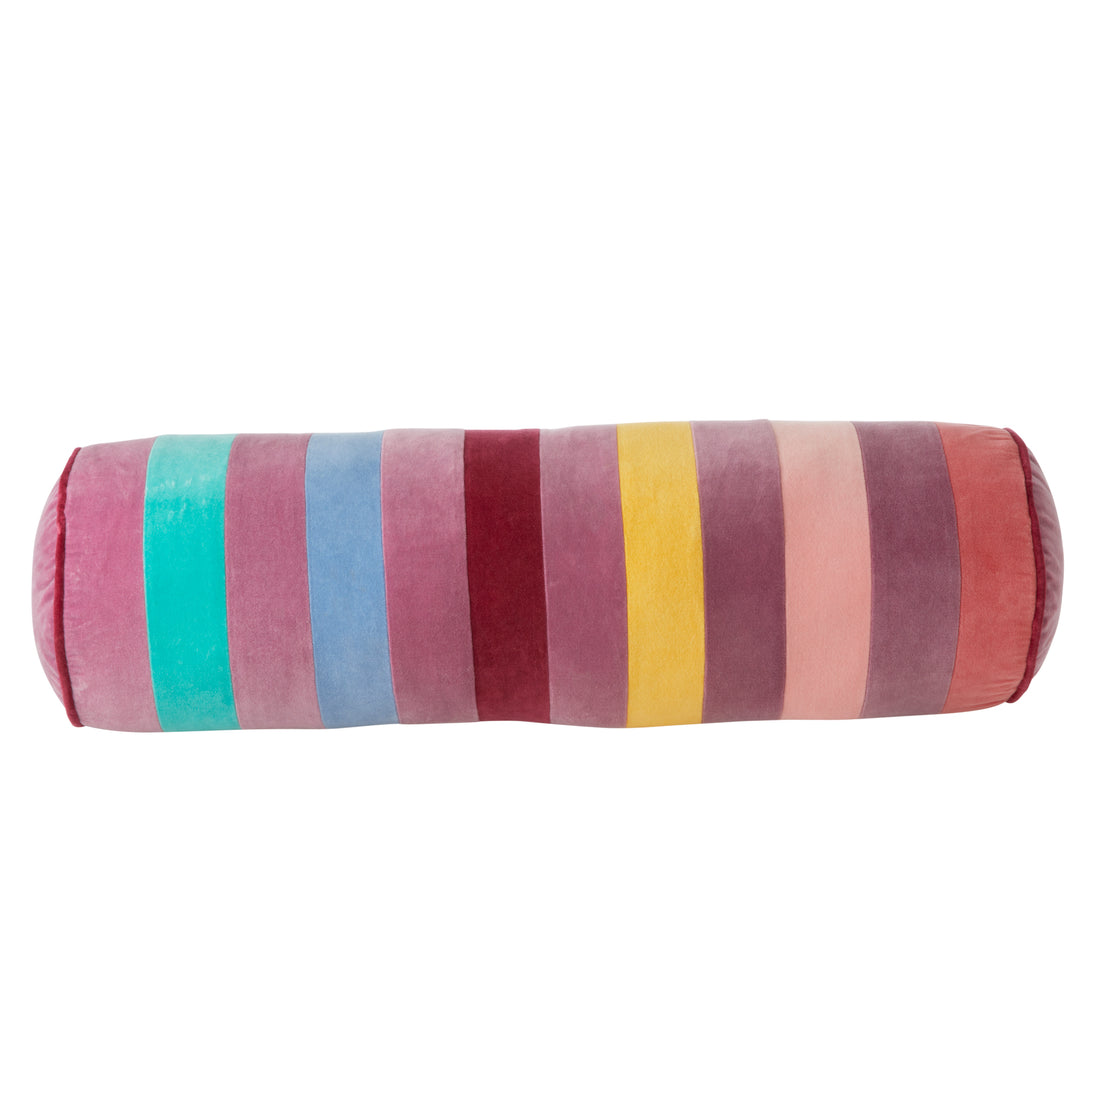 rice-dk-velvet-bolster-pillow-with-dance-out-stripes-large-assorted-rice-csbol-lstri- (1)